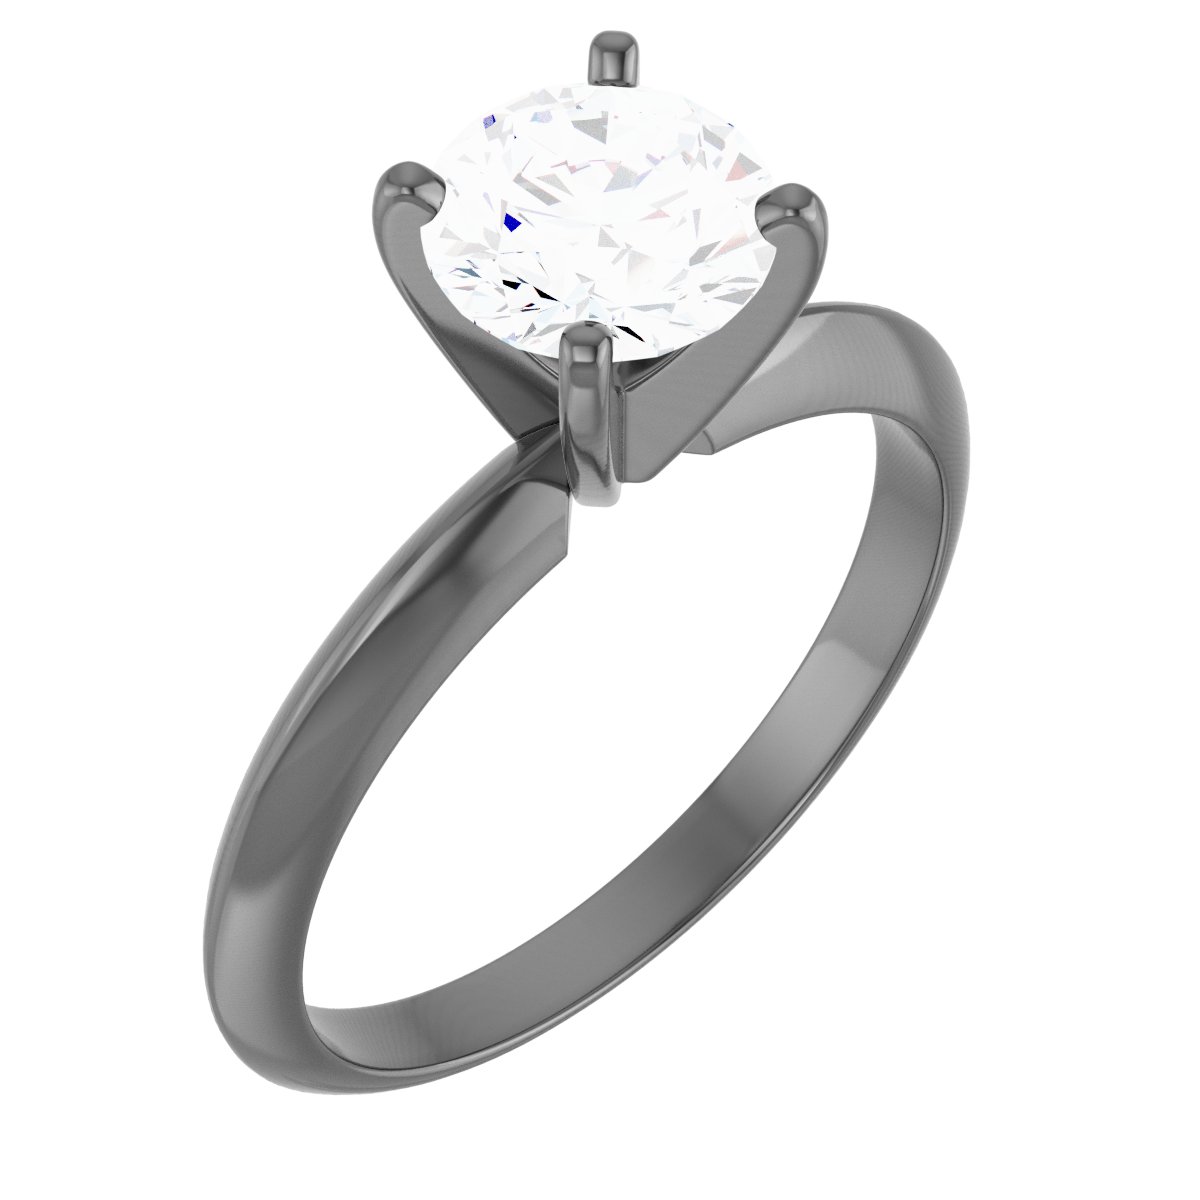 Round 4-Prong Light Solitaire Ring or Mounting